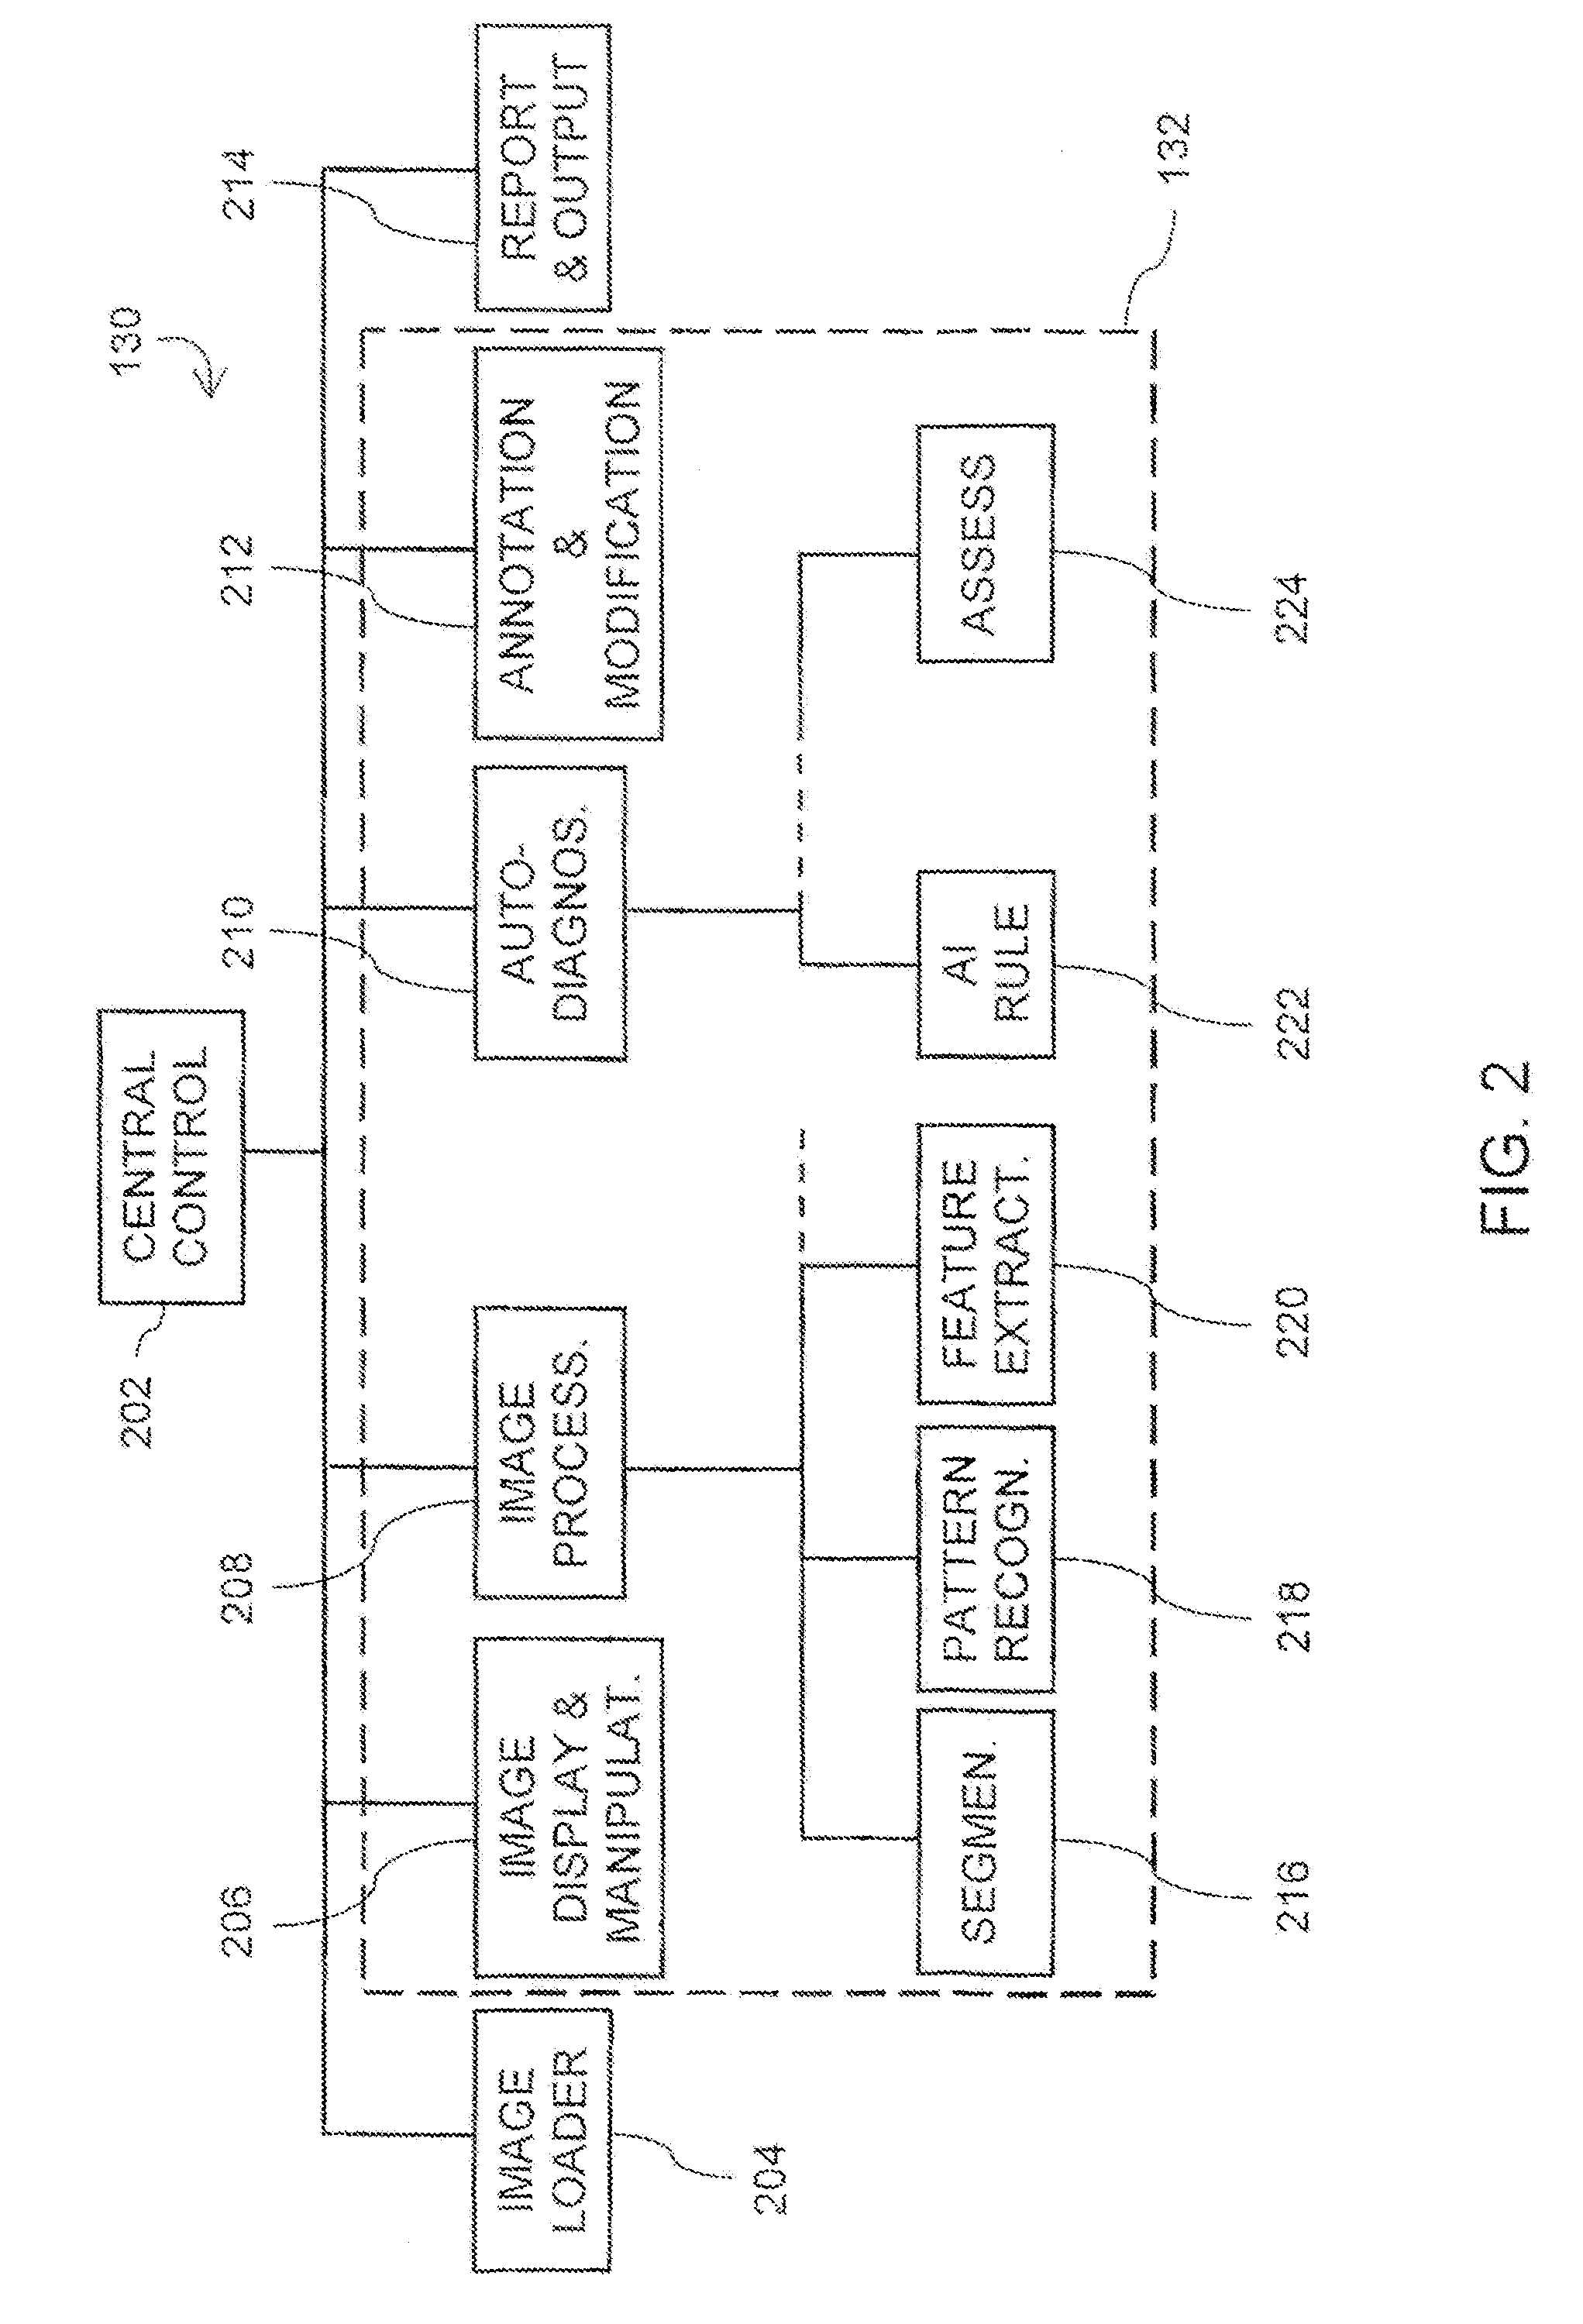 System and method of computer-aided detection